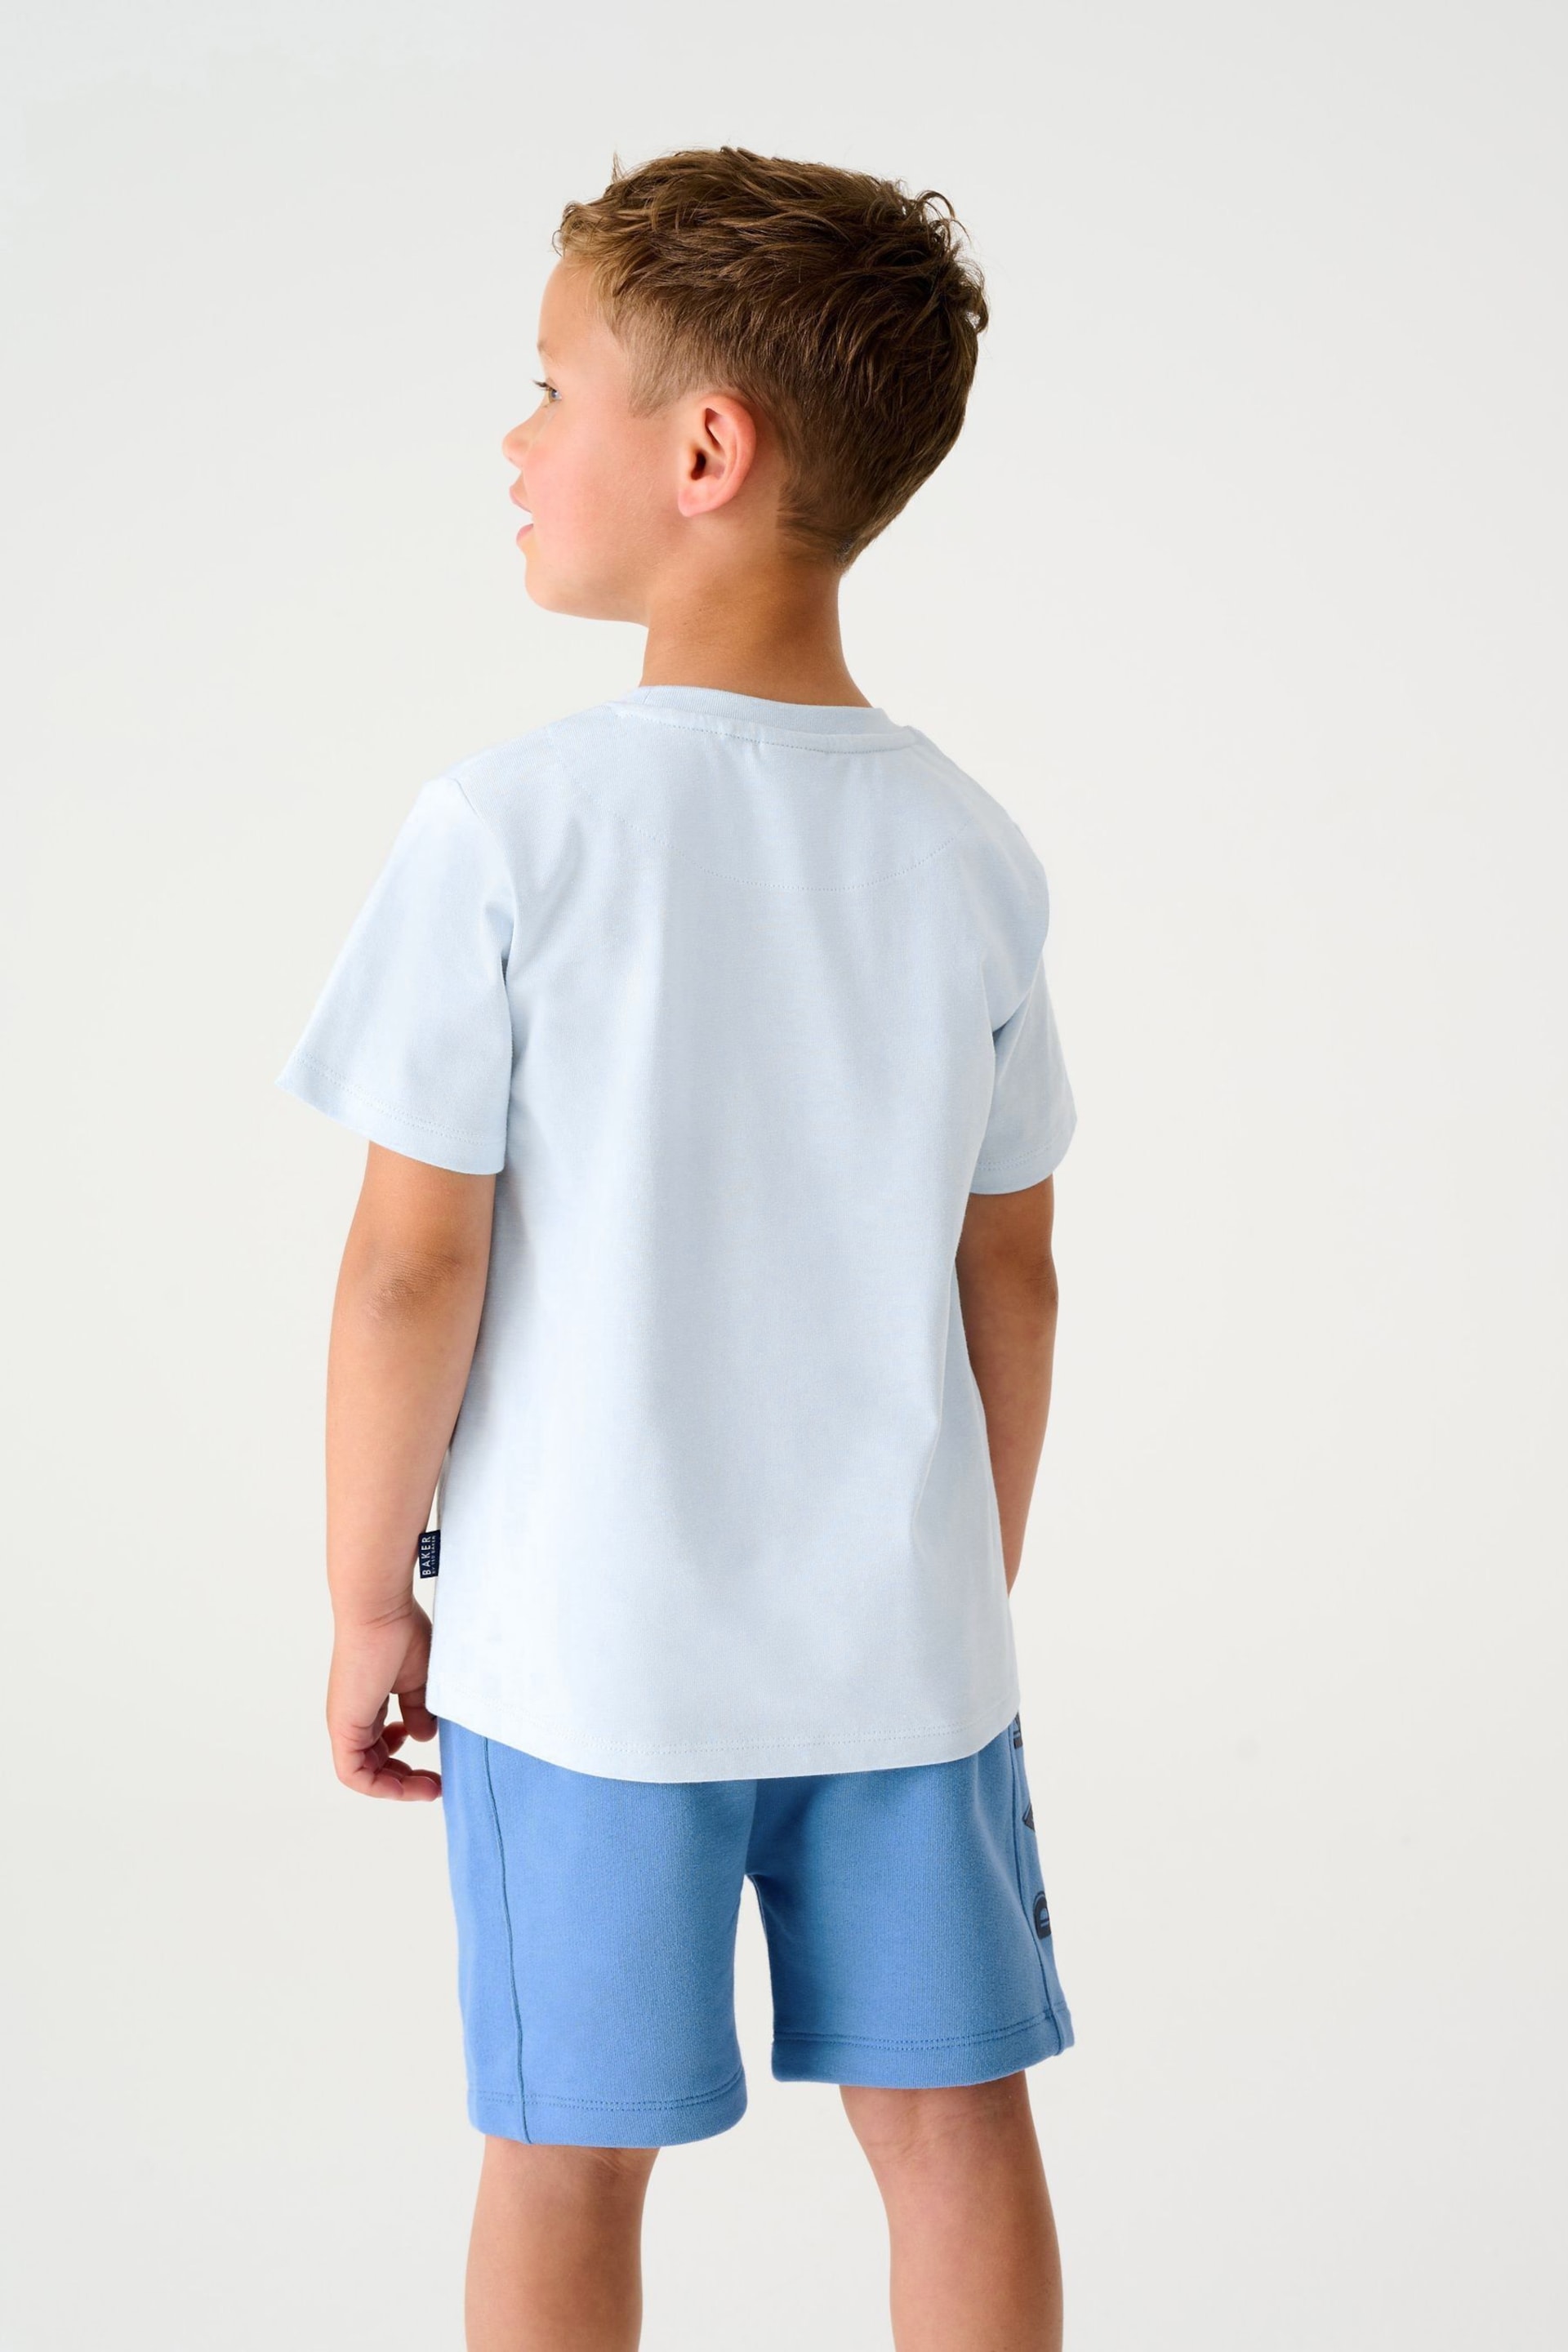 Baker by Ted Baker T-Shirt and Shorts Set - Image 2 of 7